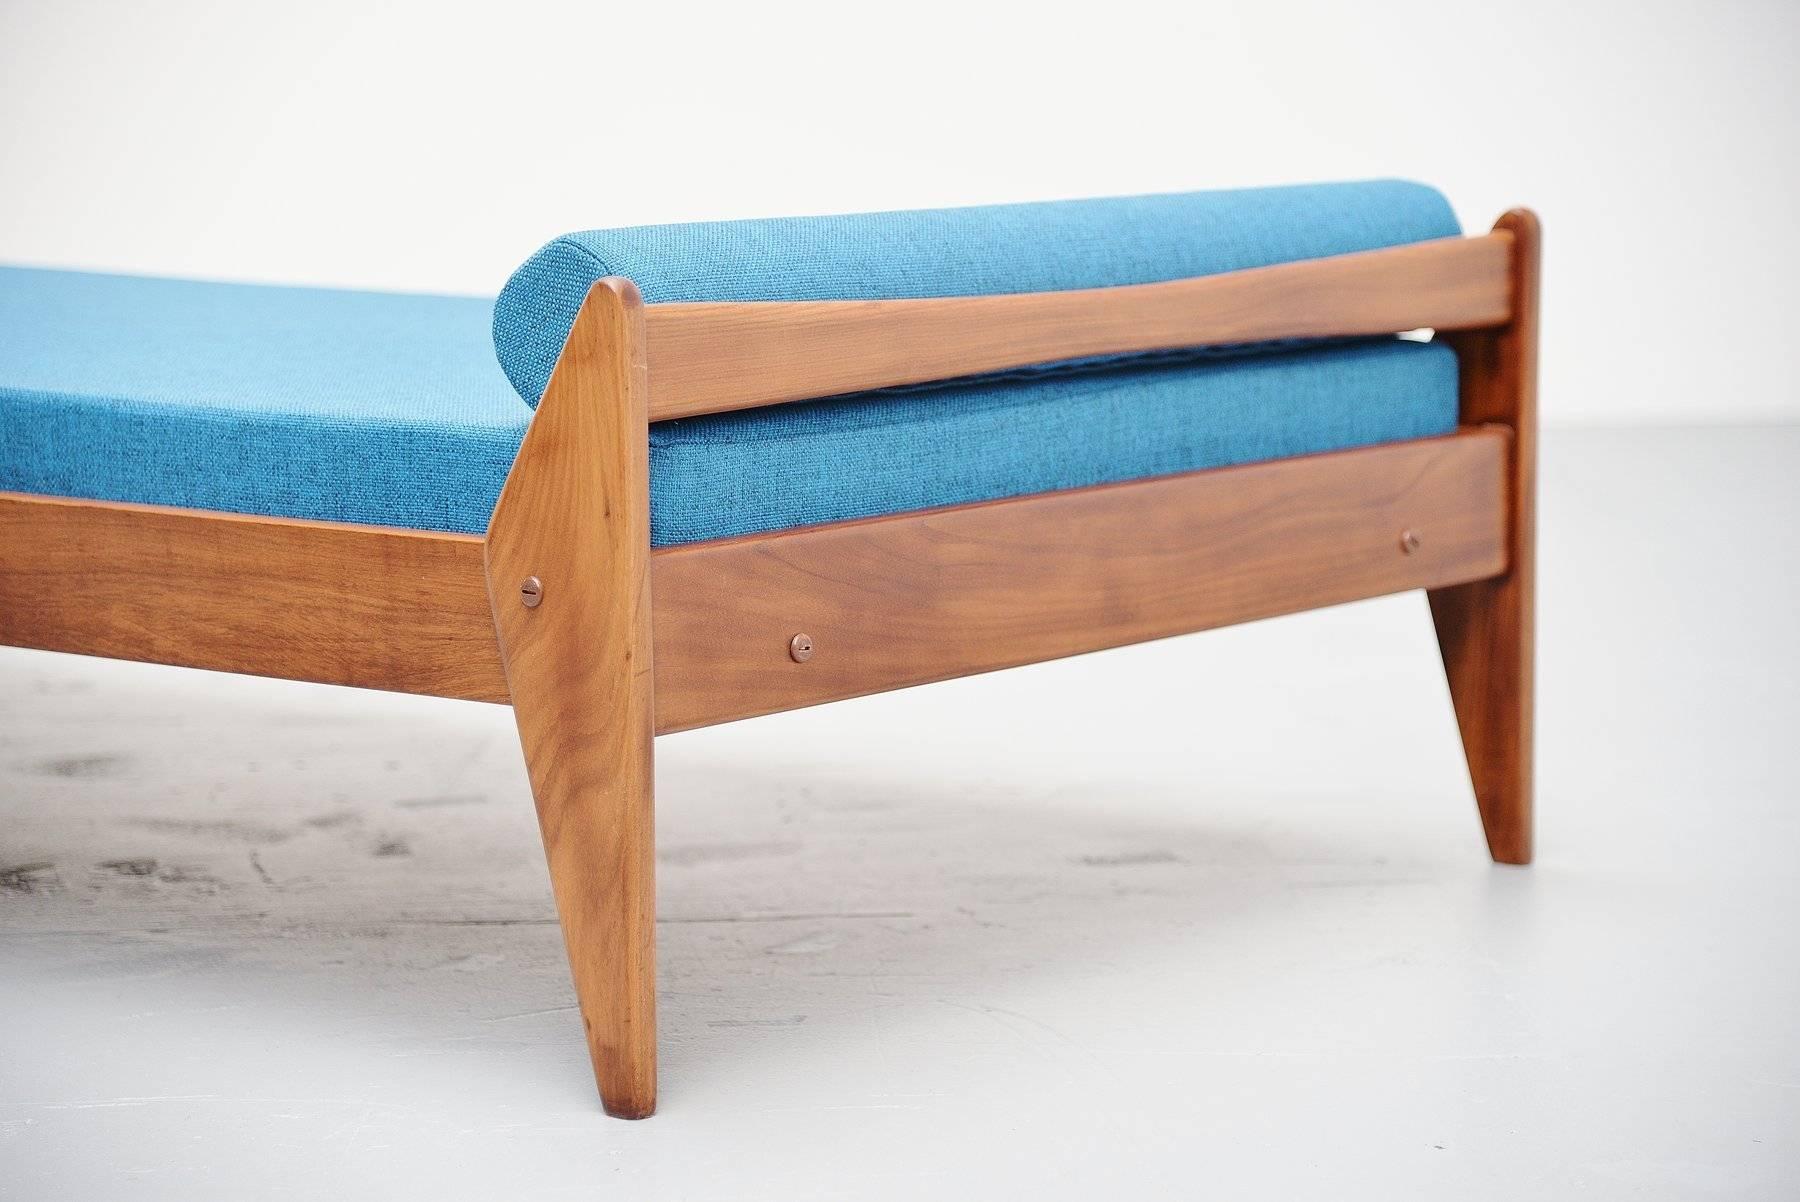 Very nicely shaped teak daybed made by Vamo Sonderborg, possible designed by Arne Wahl Iversen, Denmark, 1960. This bed is made of solid teak and we upholstered it with dark blue fabric which is a great contrast with the teakwood. Very nice and